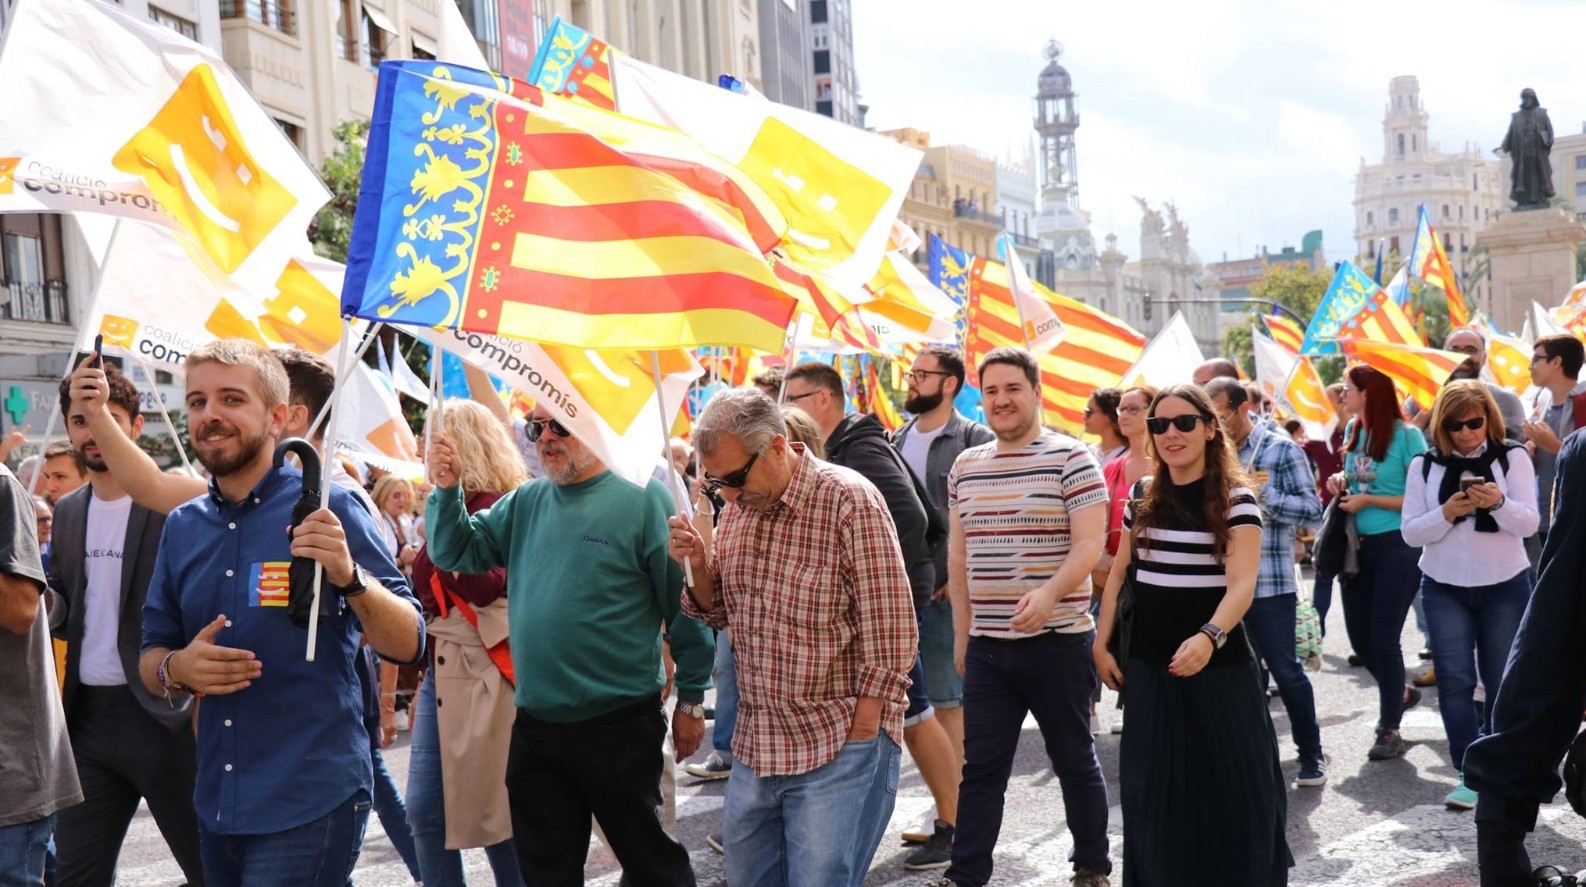 Valencian National Day: Bloc calls for a green transition towards a socially cohesive country